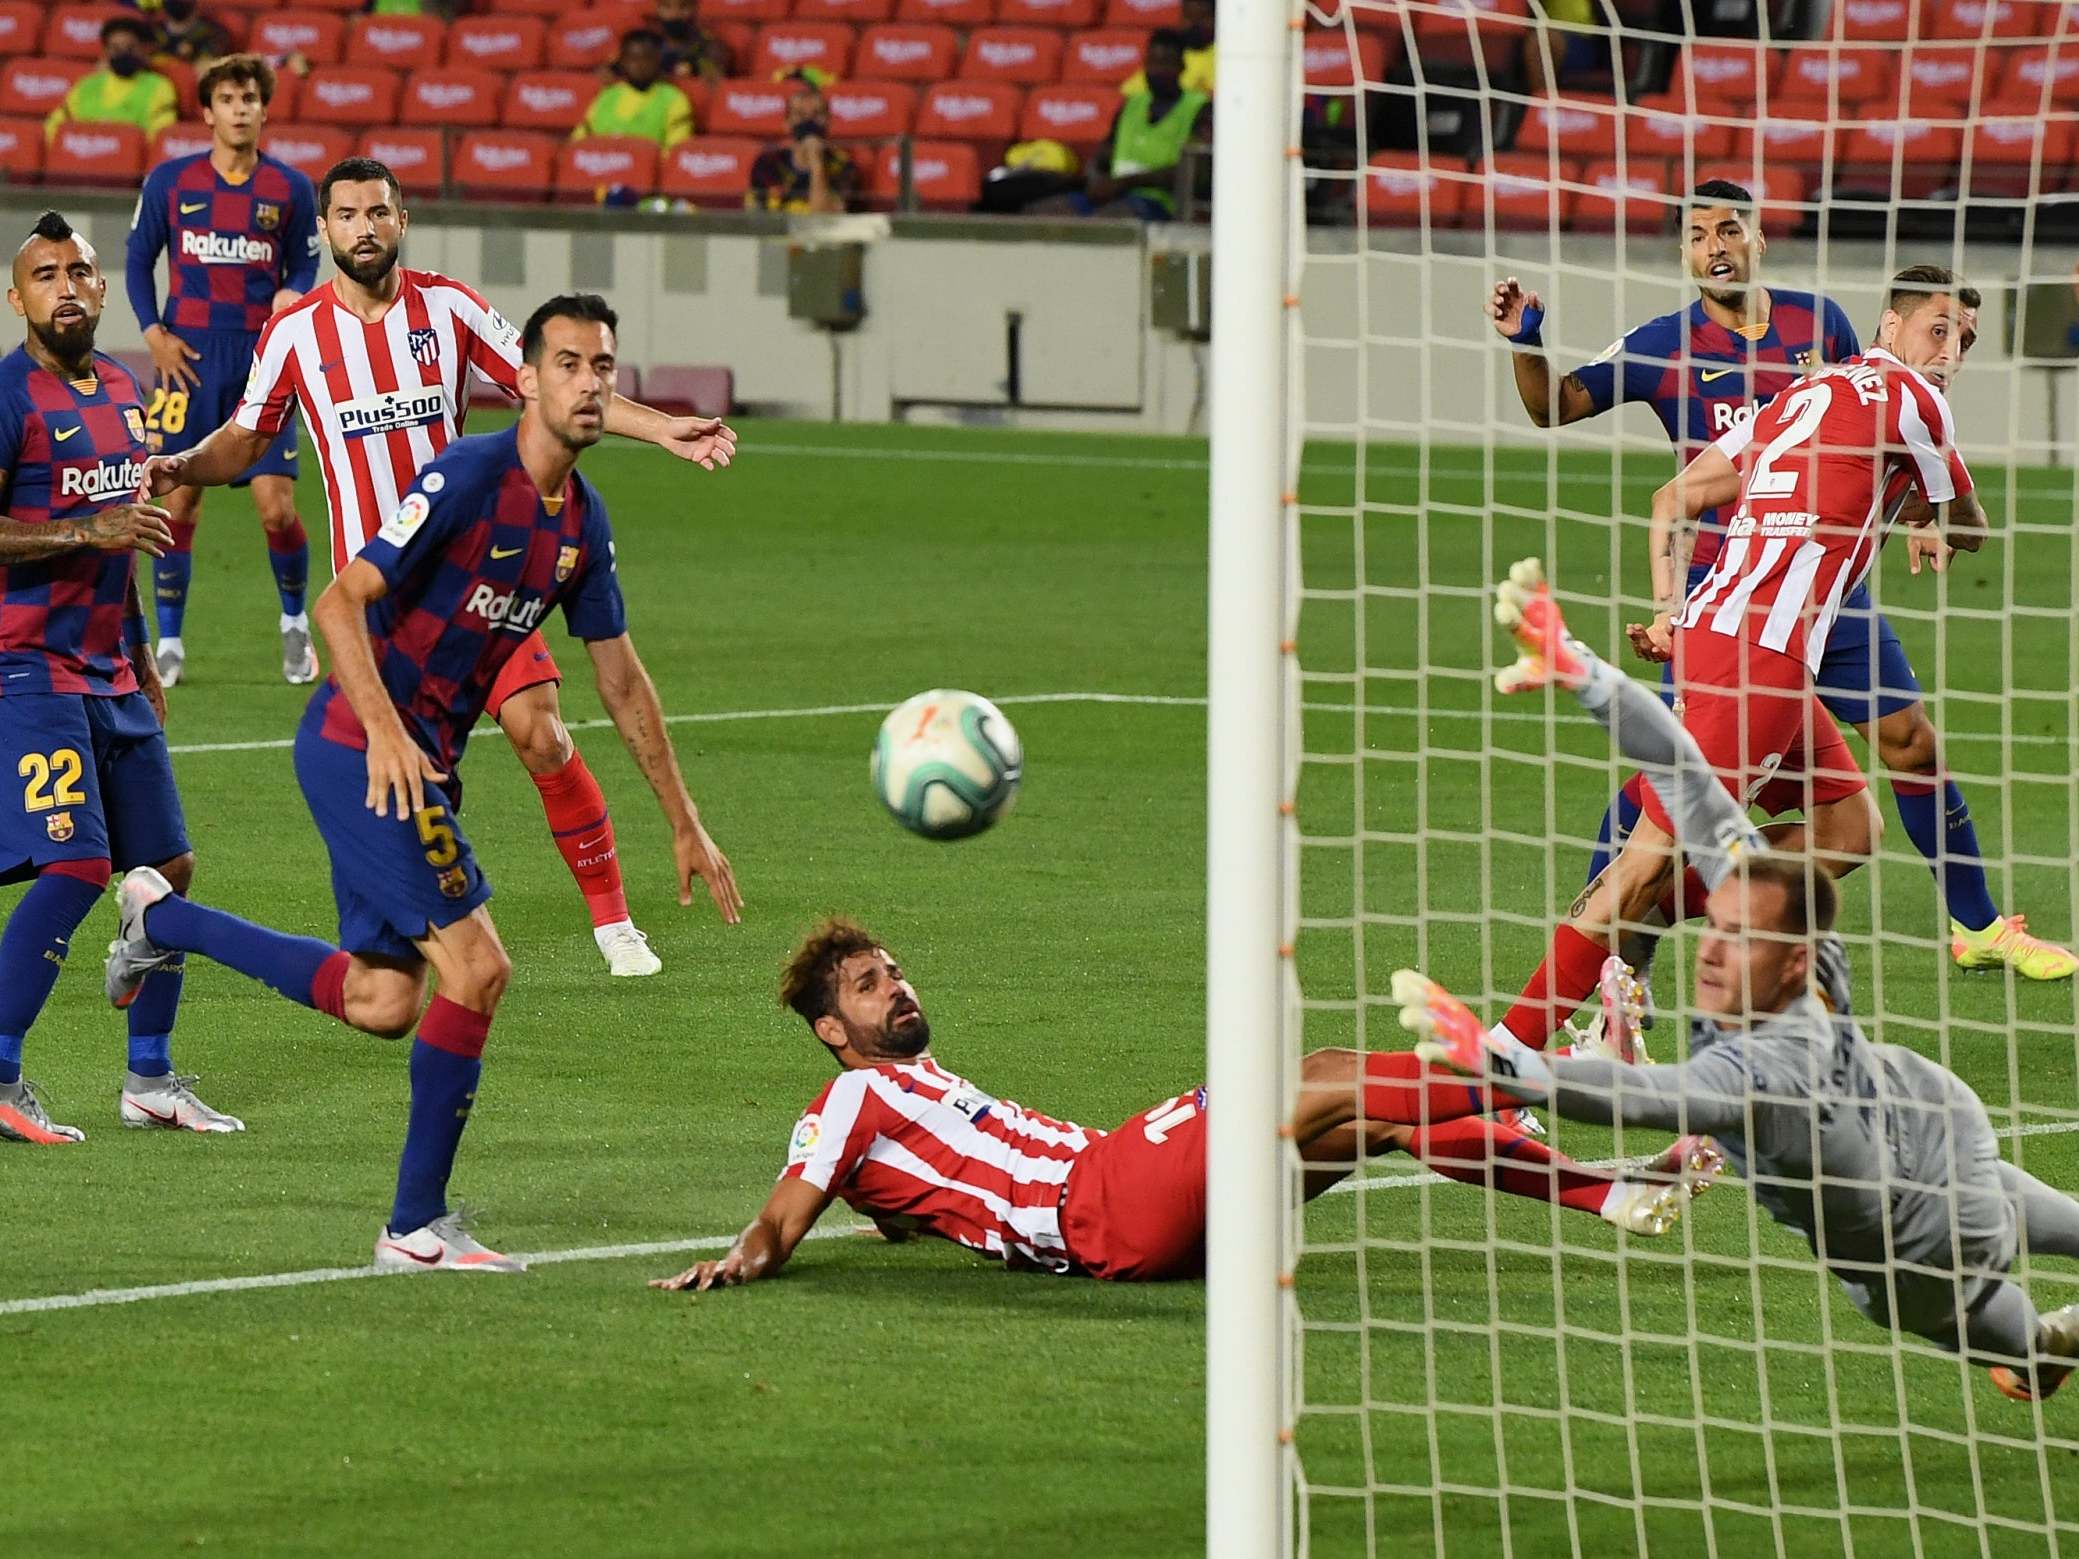 Diego Costa misses an early chance for Atletico